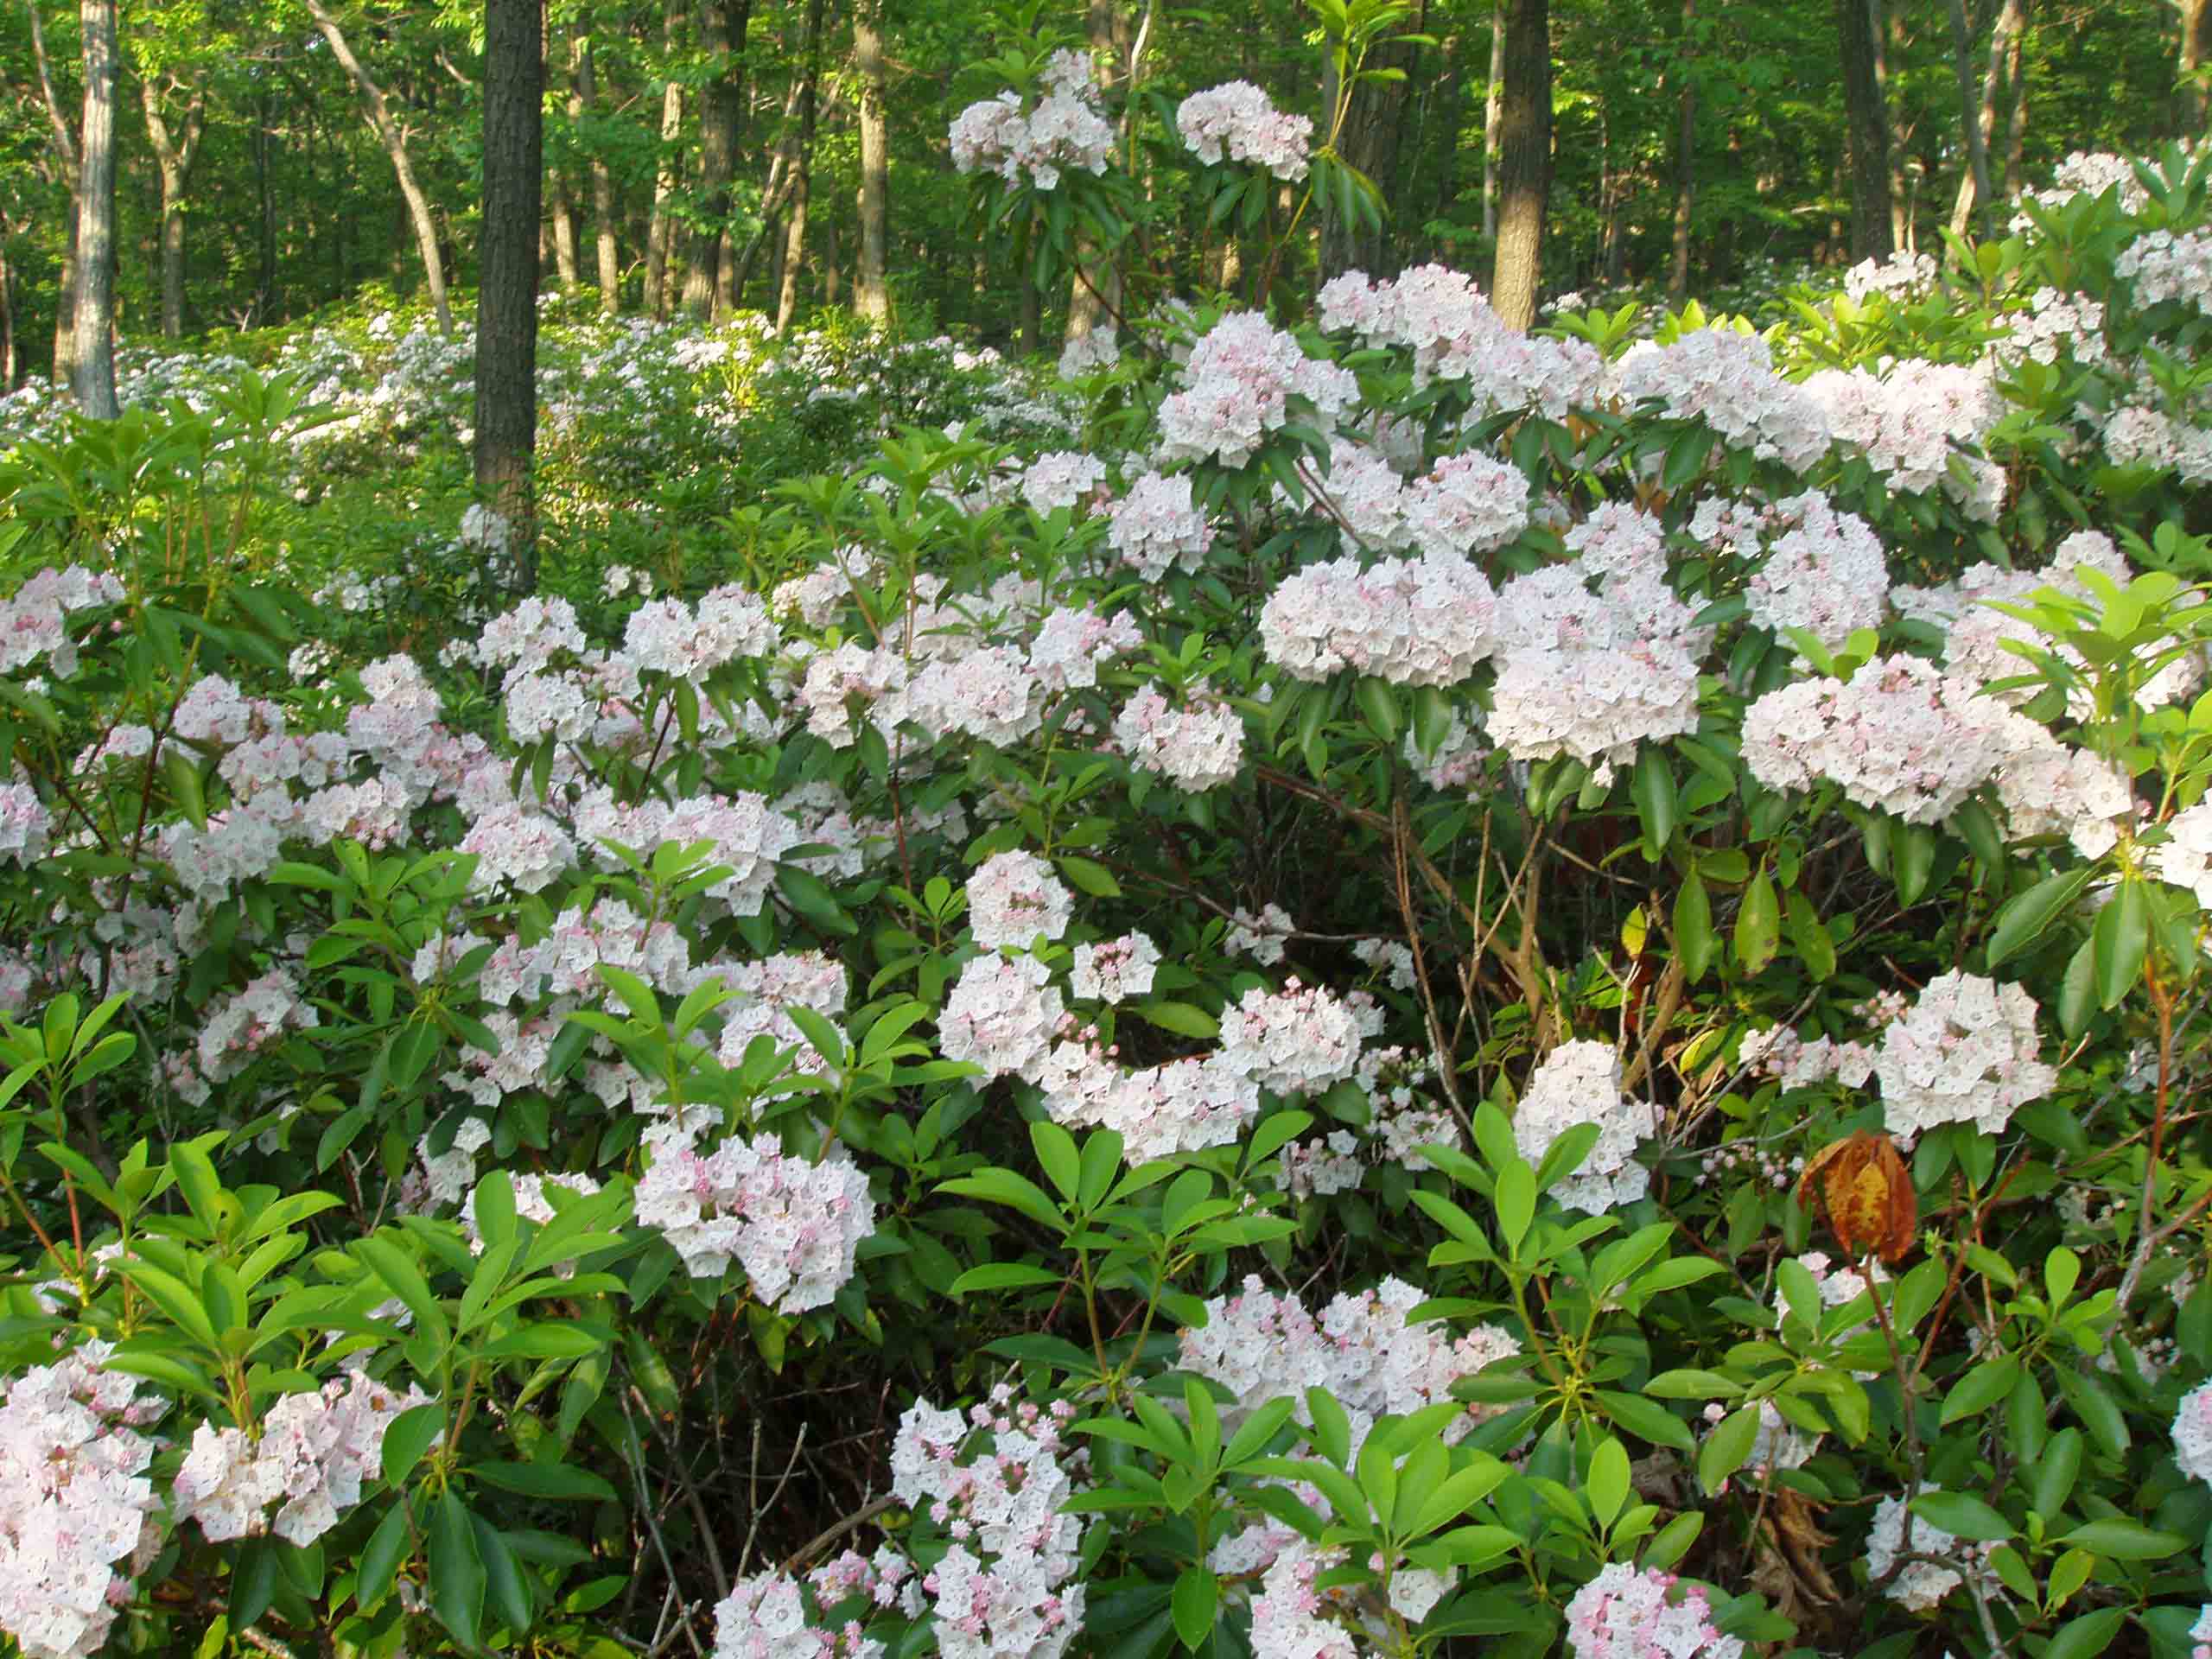 Western side of Letterrock Mountain. Miles and Miles of flourishing mountain laurel in full bloom in New York's Harriman State Park on June 8th 2007.  Courtesy froto